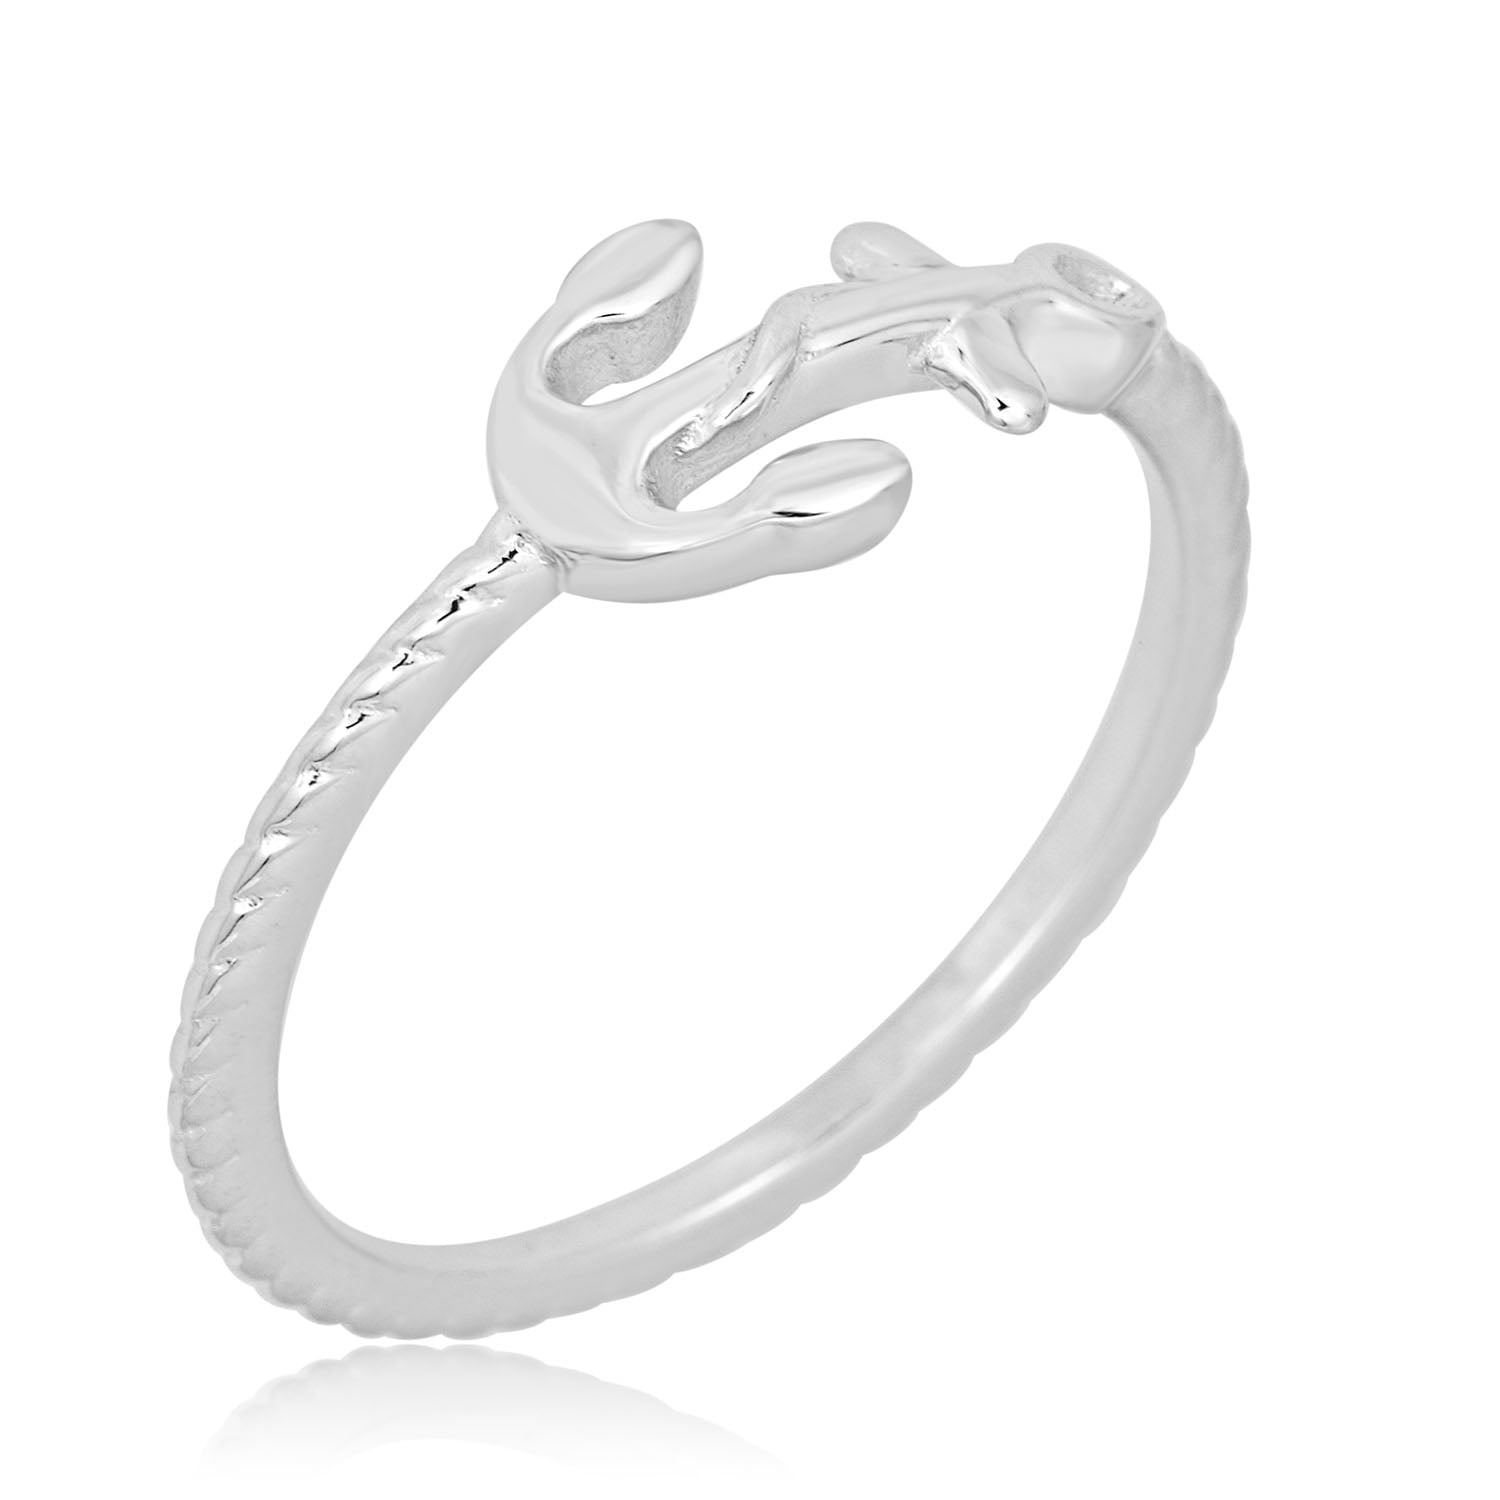 8.25-8.5 Details about   CHARMING STERLING SILVER .925 WITH SHELL TABLET RINGS SIZES 6.75-7.0 